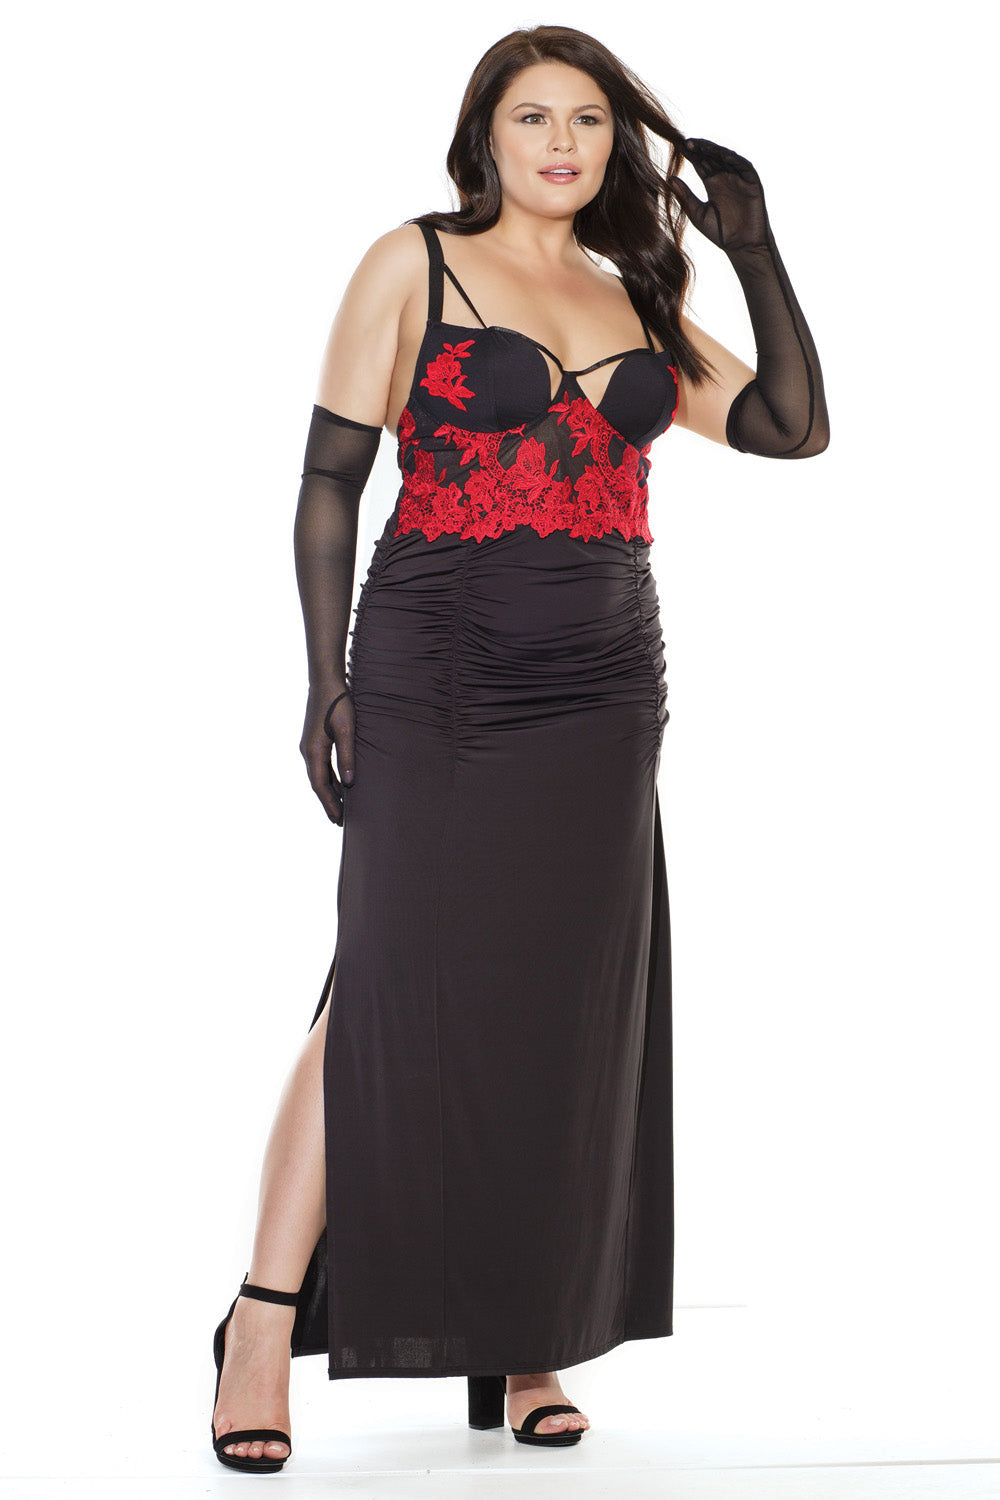 Microfibre Gown with Side Slit 3870 - Black/Red